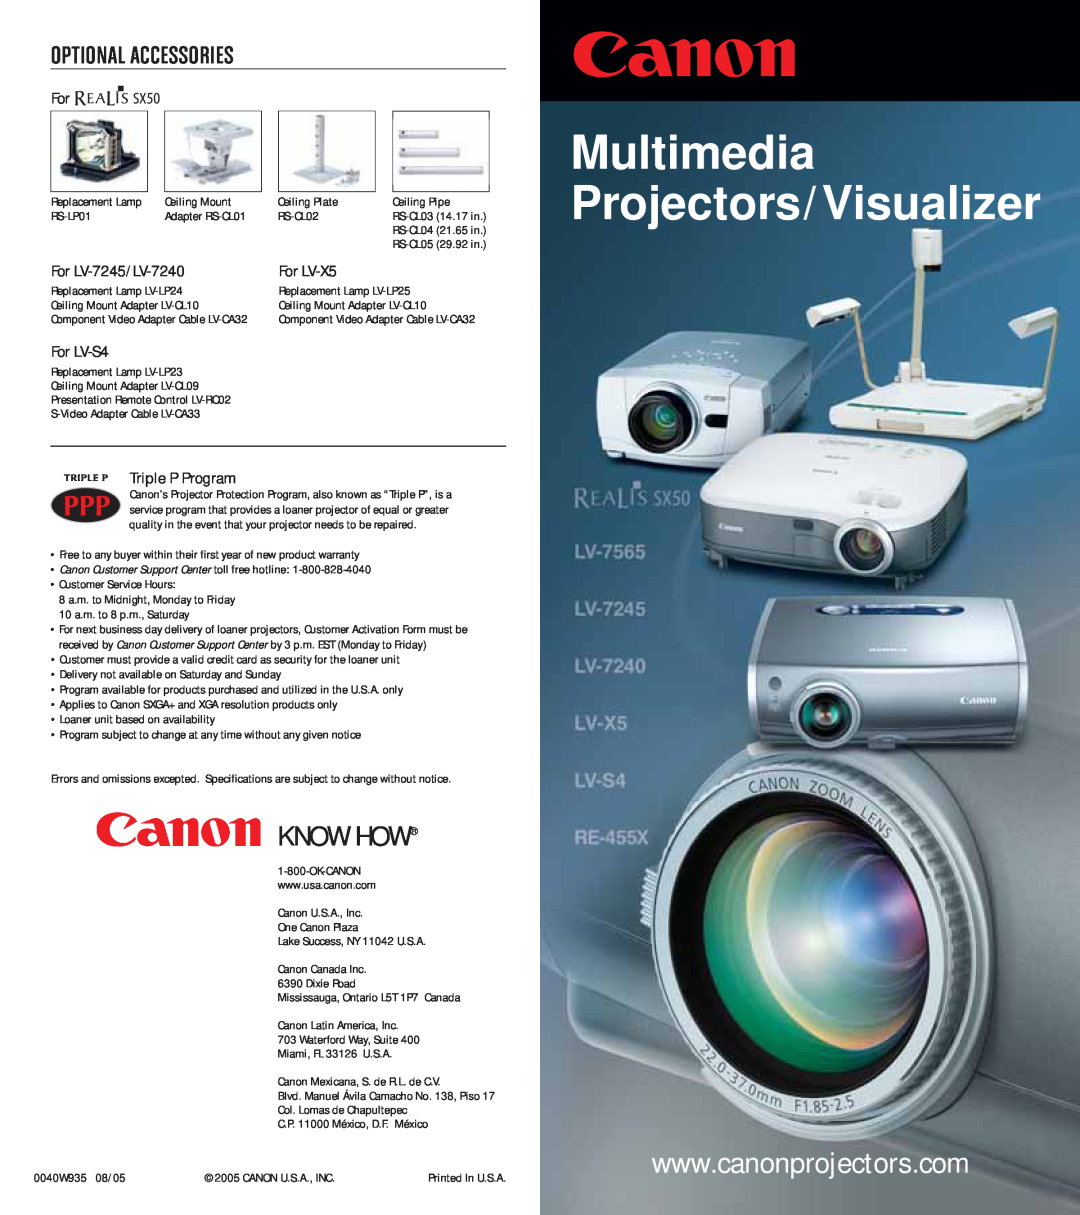 Canon LV-7245 warranty Optional Accessories, Multimedia Projectors/Visualizer, C Know How, 10 a.m. to 8 p.m., Saturday 